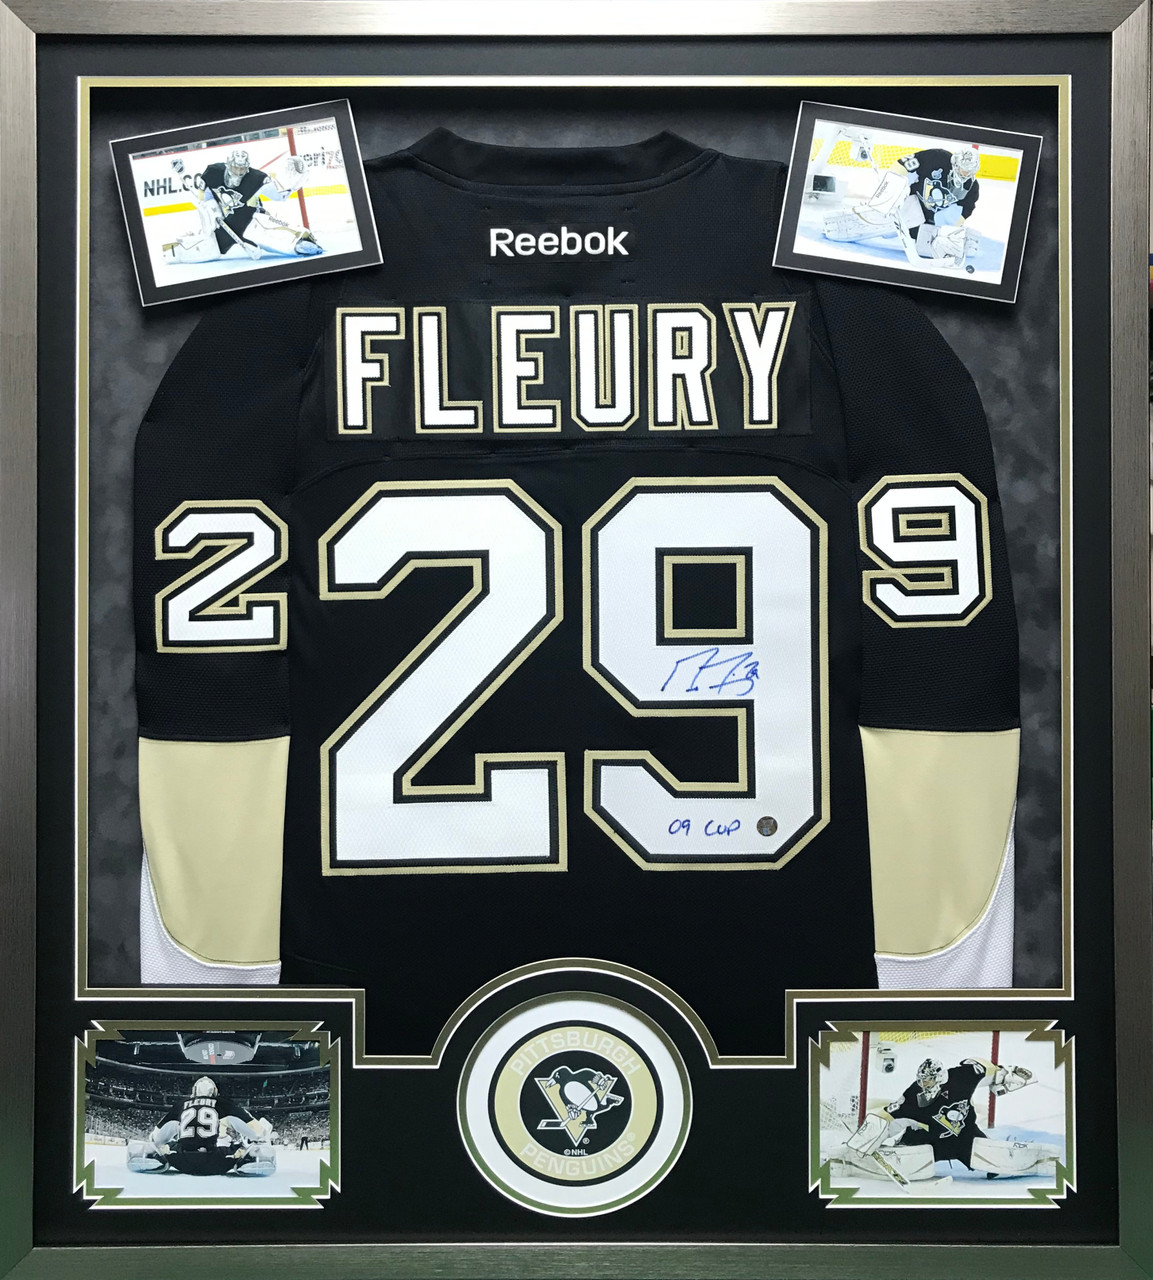 Pittsburgh Penguins Hockey Autographed Jersey Display Frame